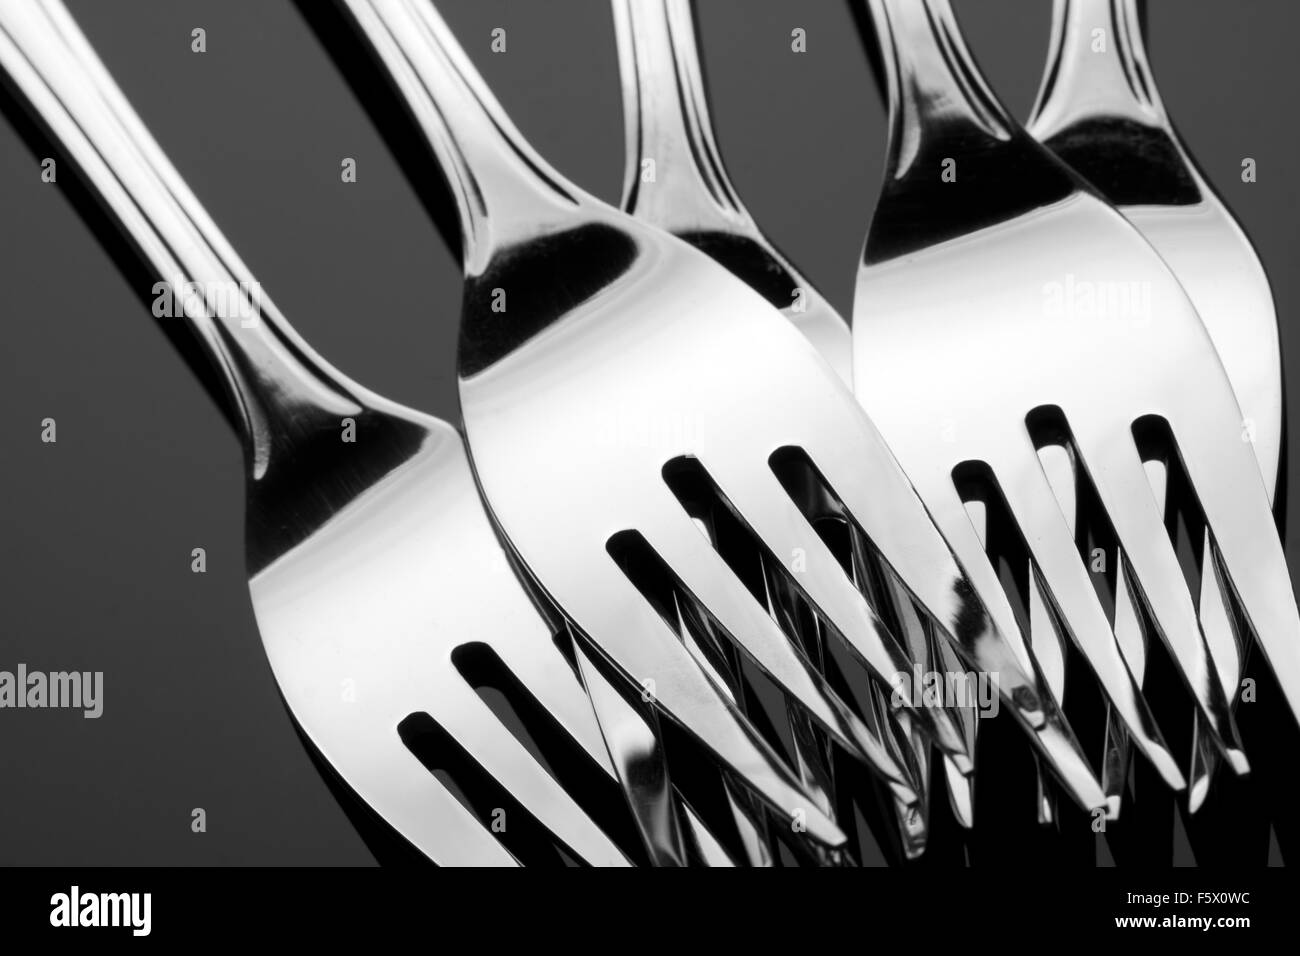 Group of silver forks. Close-up view Stock Photo